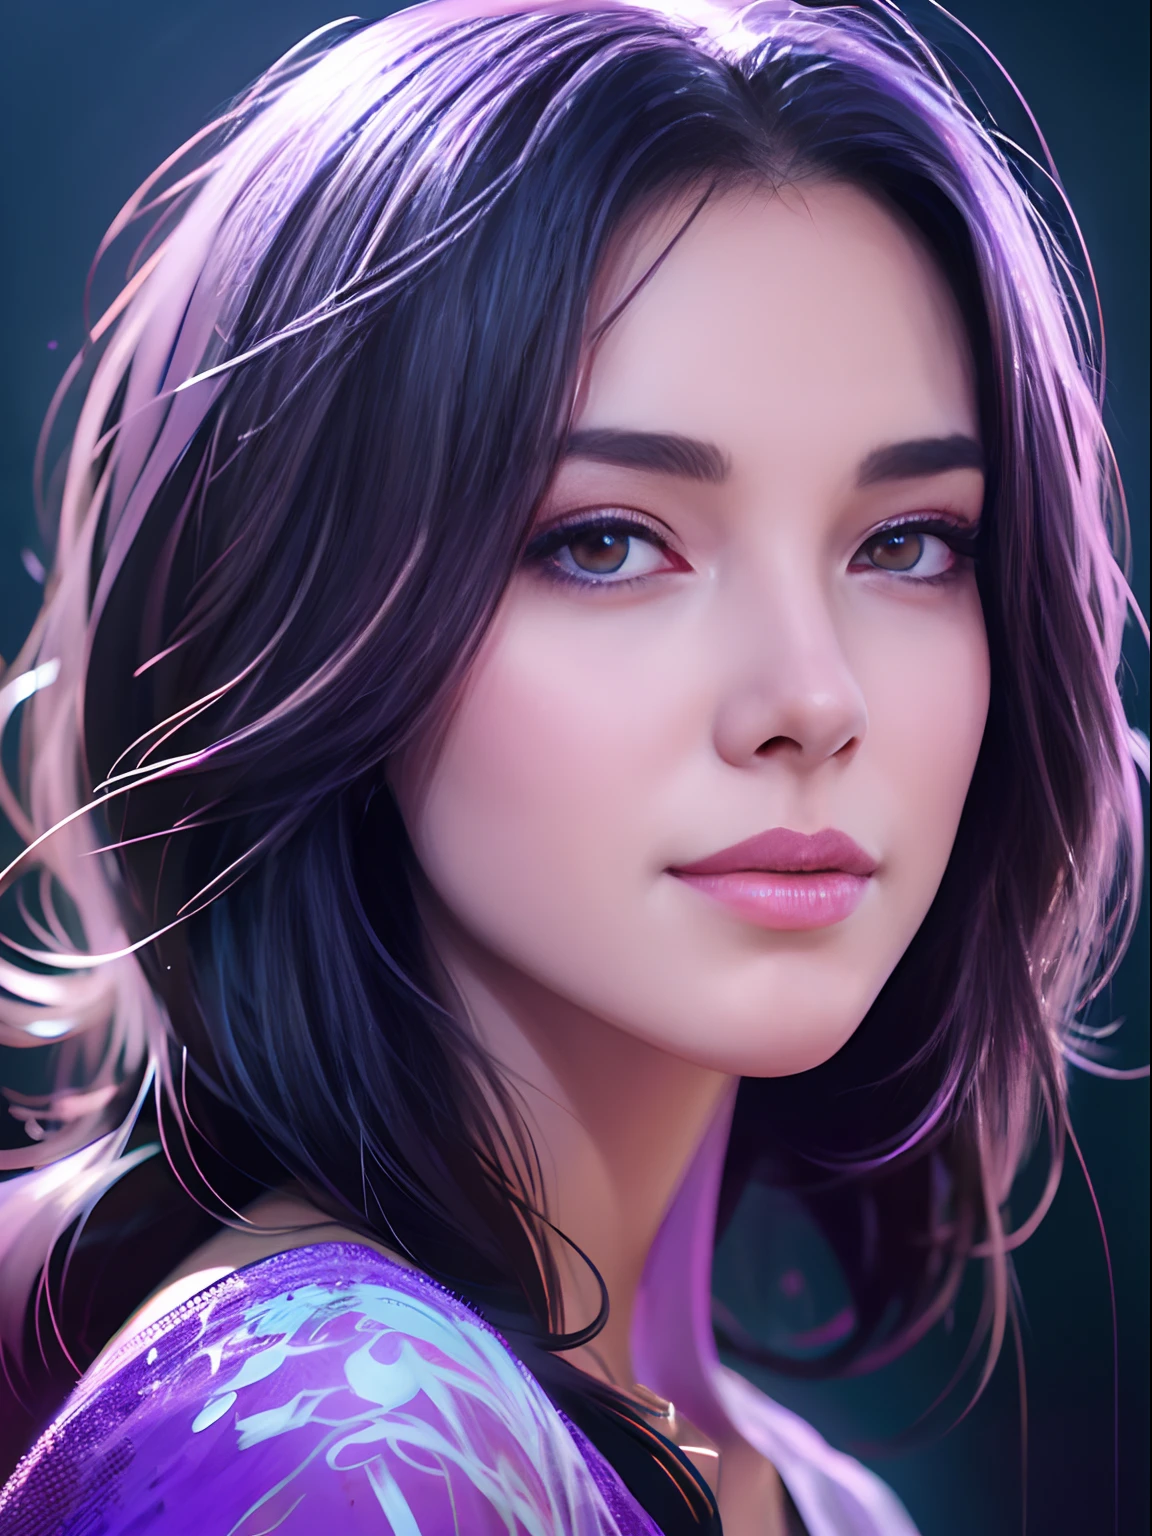 happy girl, Centered, Looking at the camera, Approaching perfection, Dynamic, Violet hue, Highly detailed, Digital Painting, Art Station, Concept art, Smooth, Sharp Focus, Illustration, art by carne griffiths and wadim kashin, Detailed face, 4K